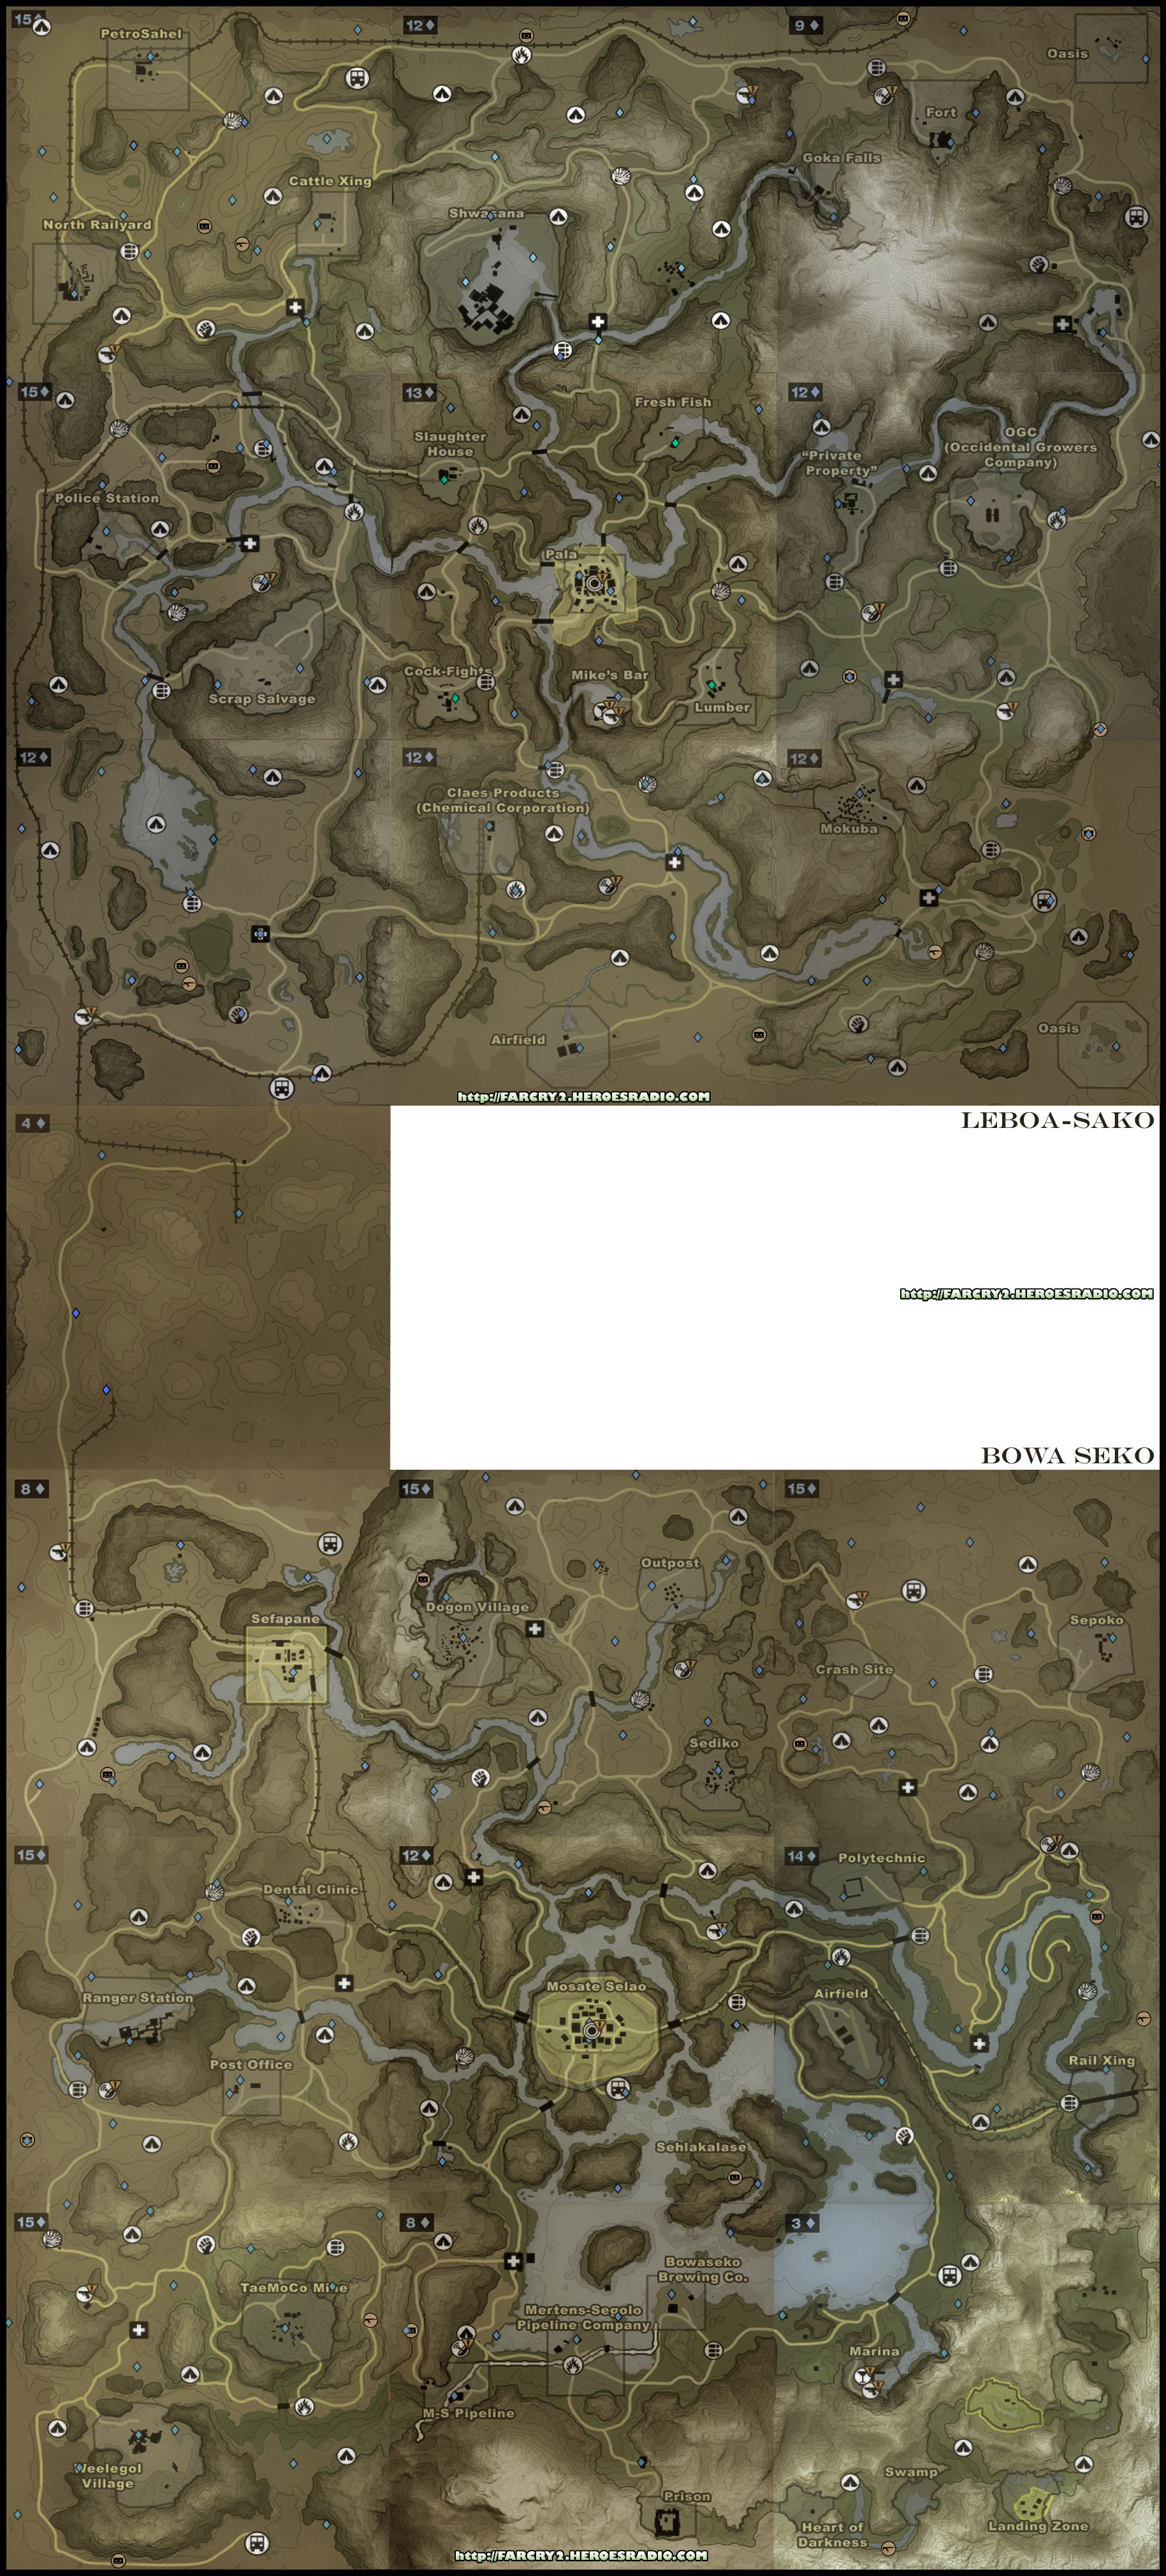 Global detailed map (Click image or link to go back)